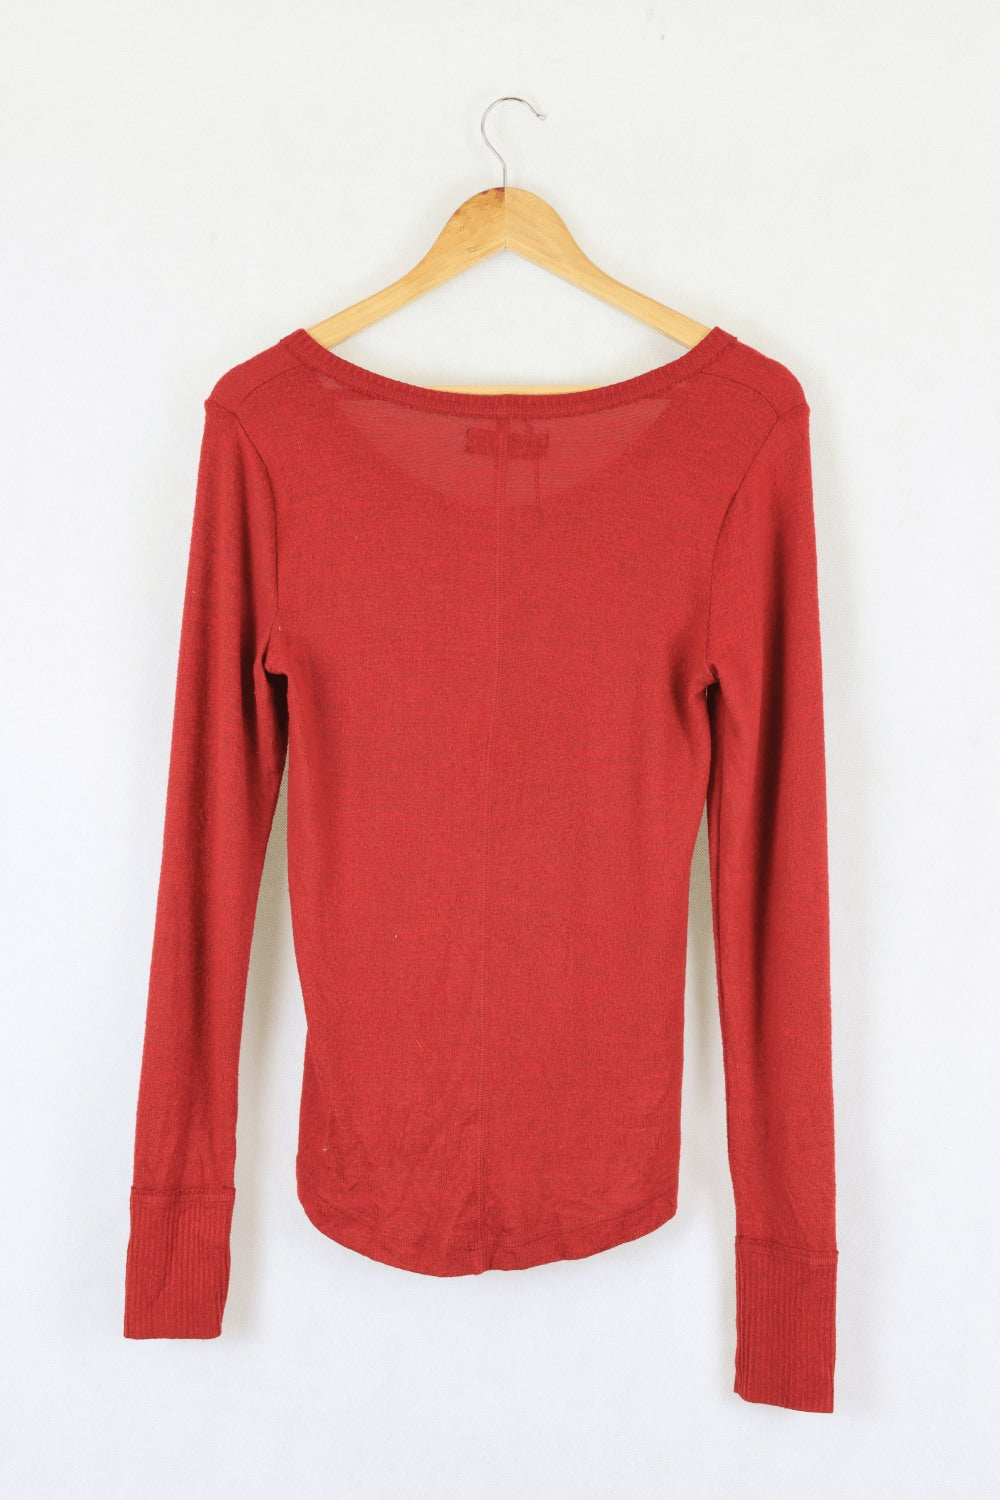 Abercrombie & Fitch Red Top M